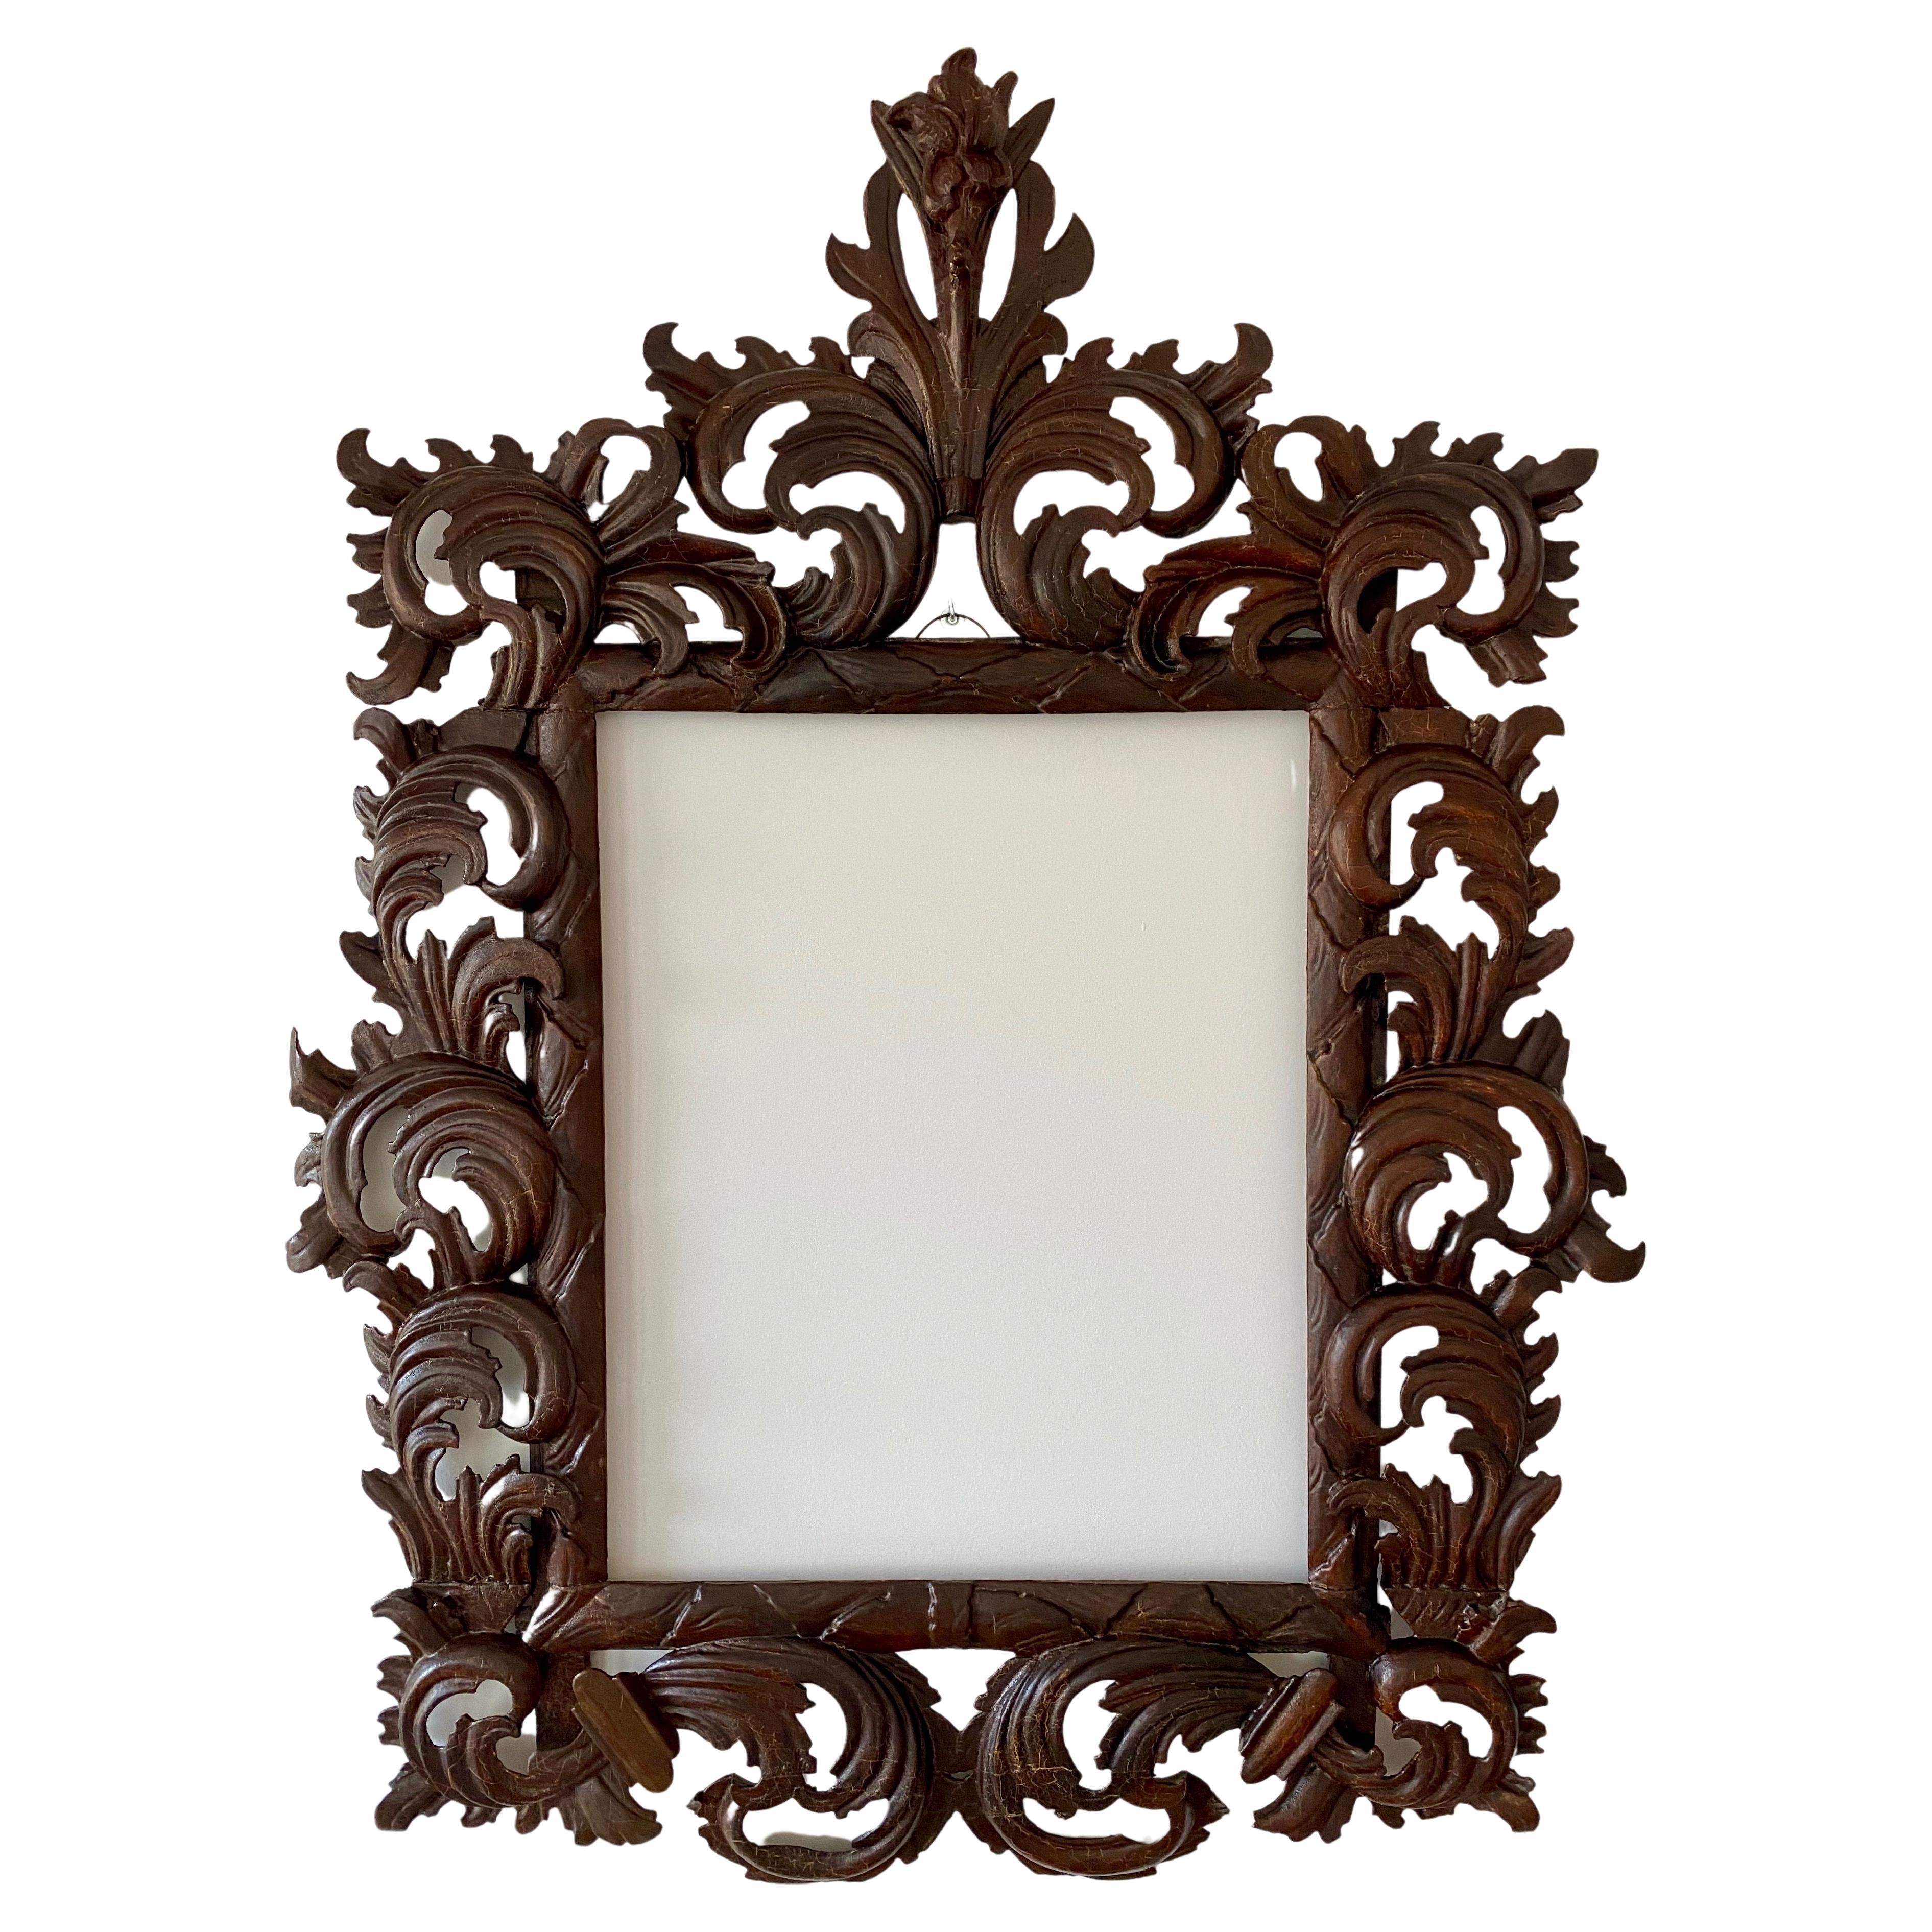 Italian Carved and Lacquered Picture Frame, Circa 1700